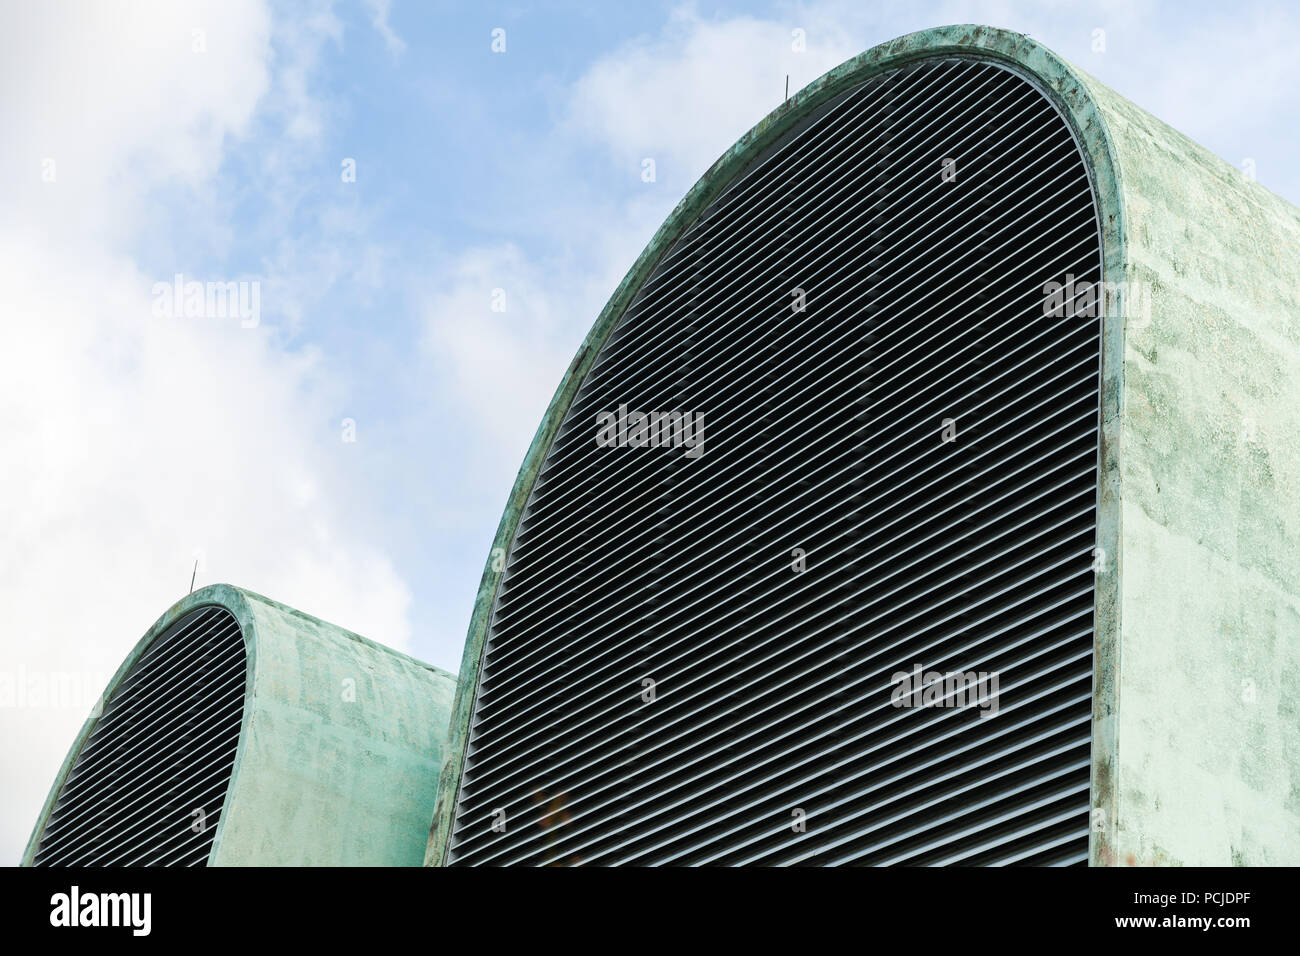 Industrial building fragment, huge green arches with ventilation grilles Stock Photo